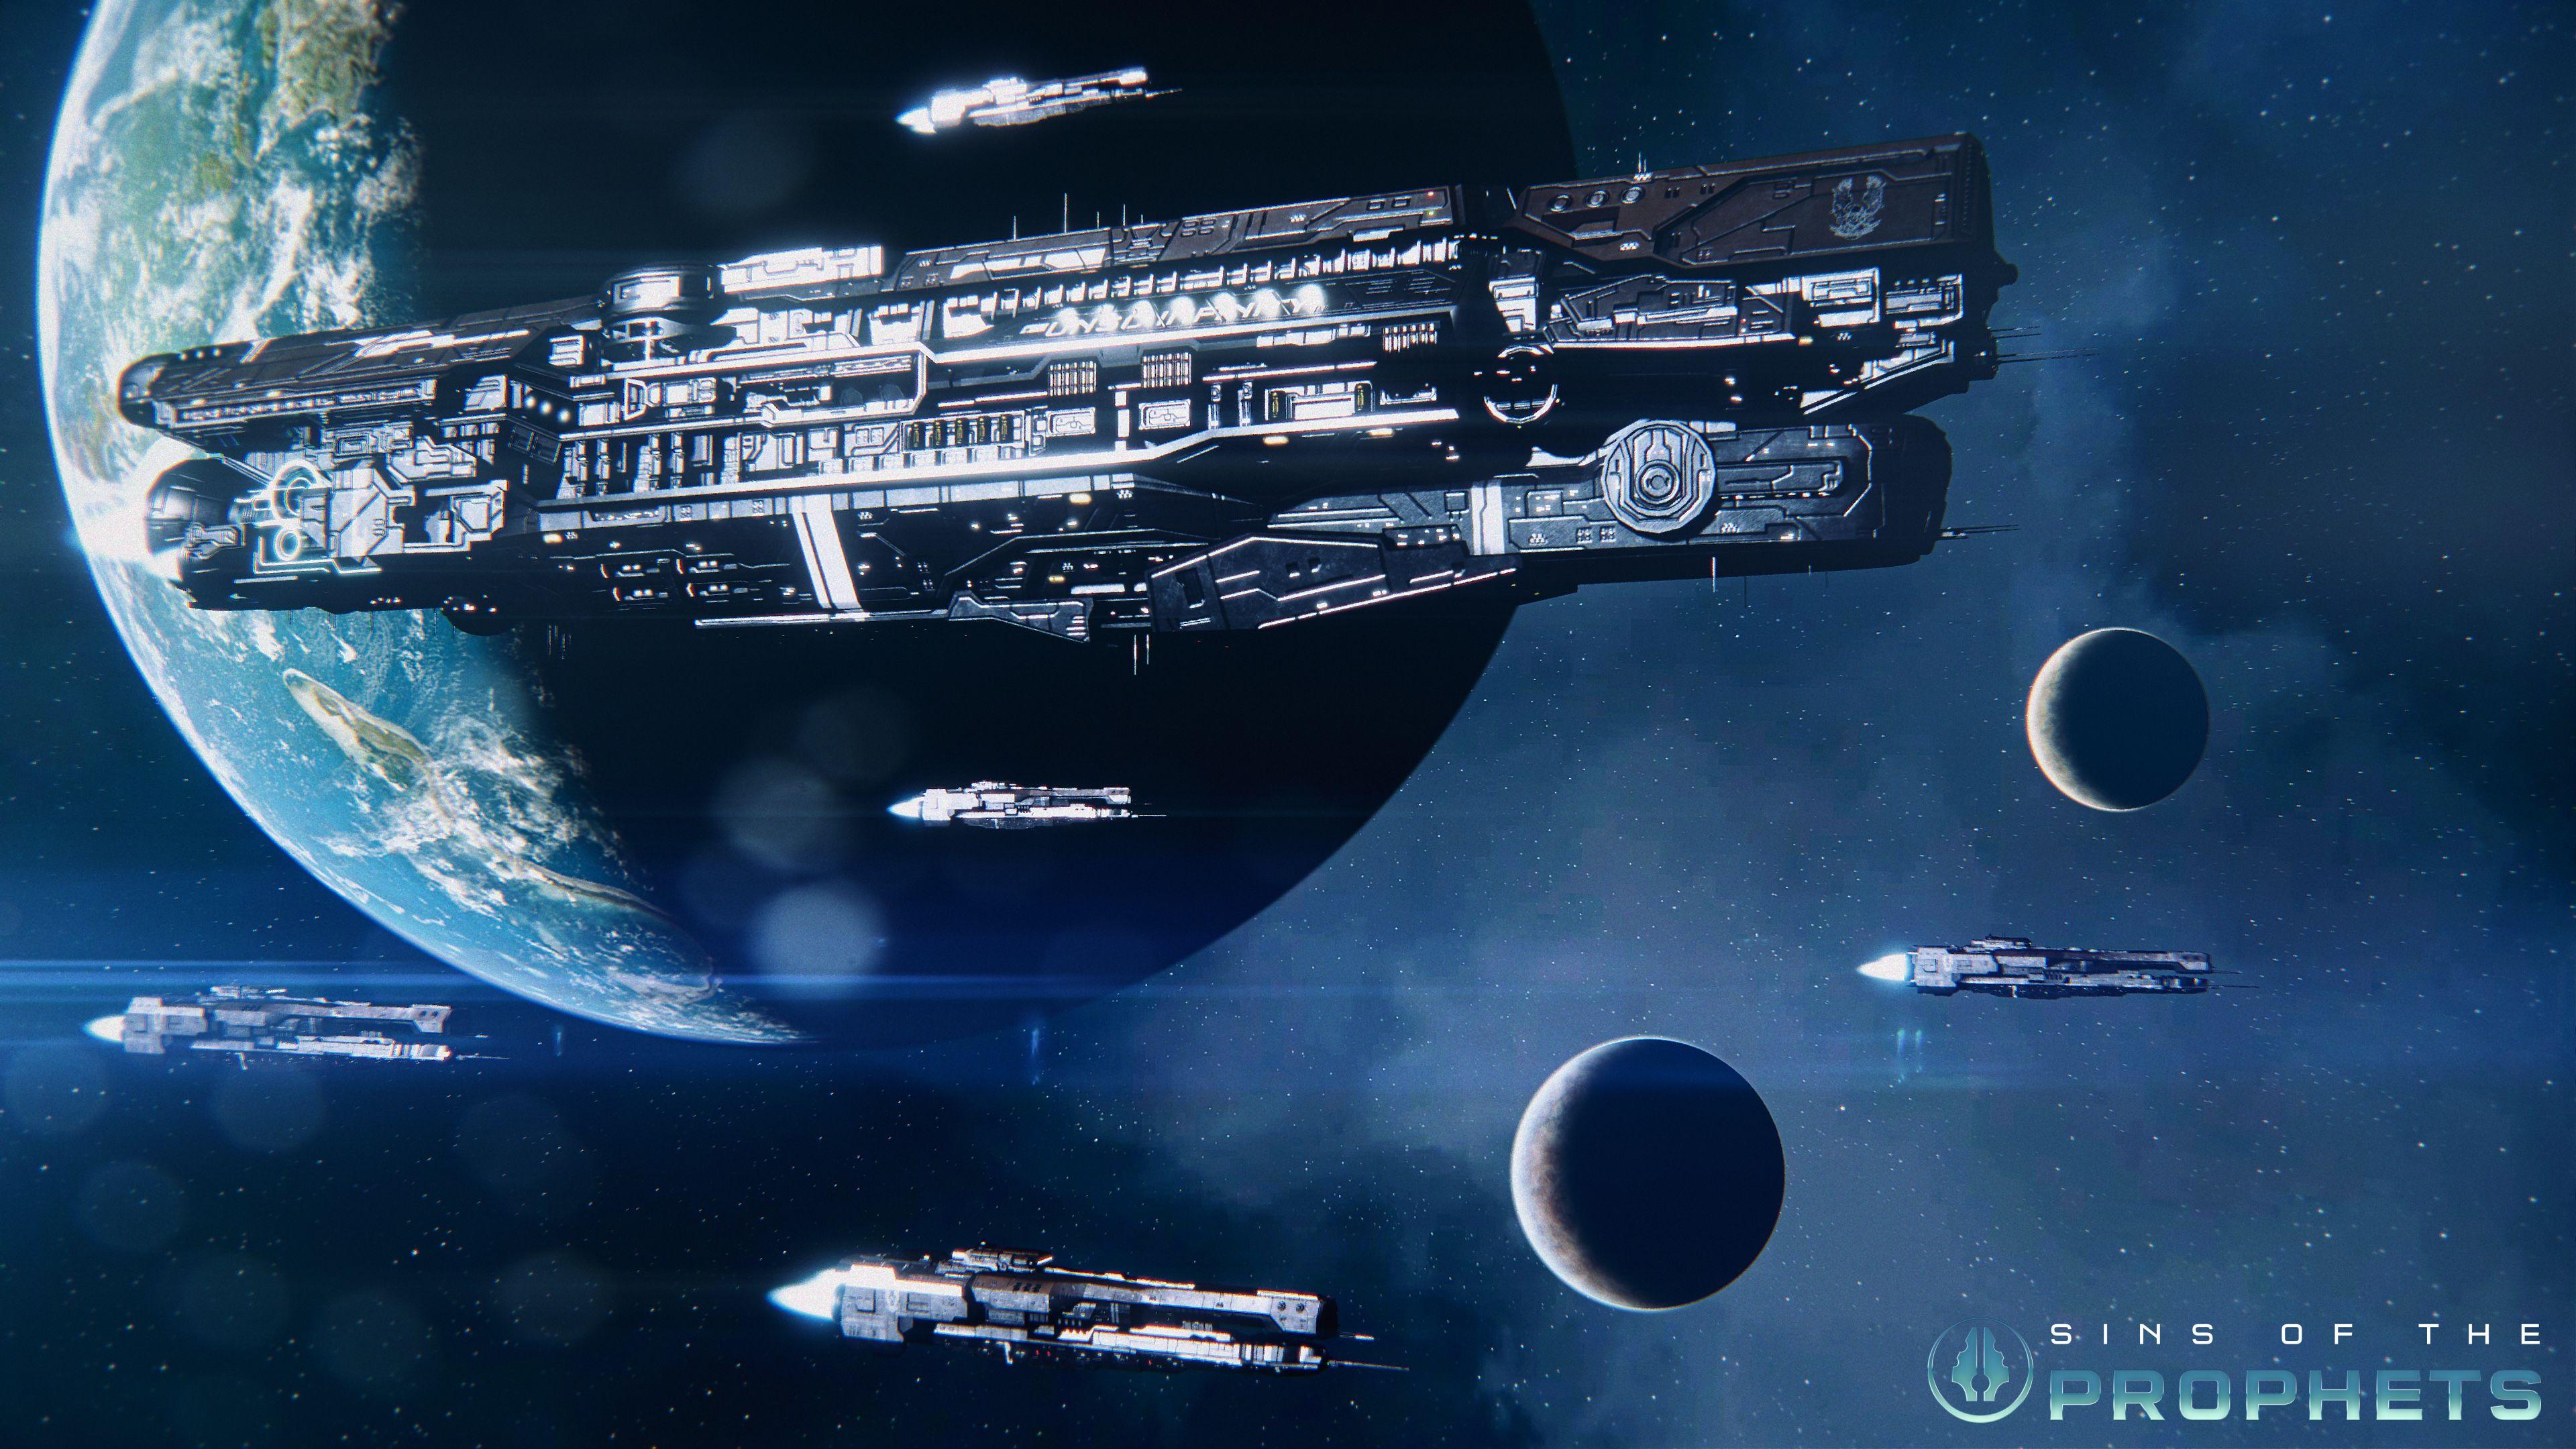 UNSC Infinity Wallpaper image of the Prophets mod for Sins